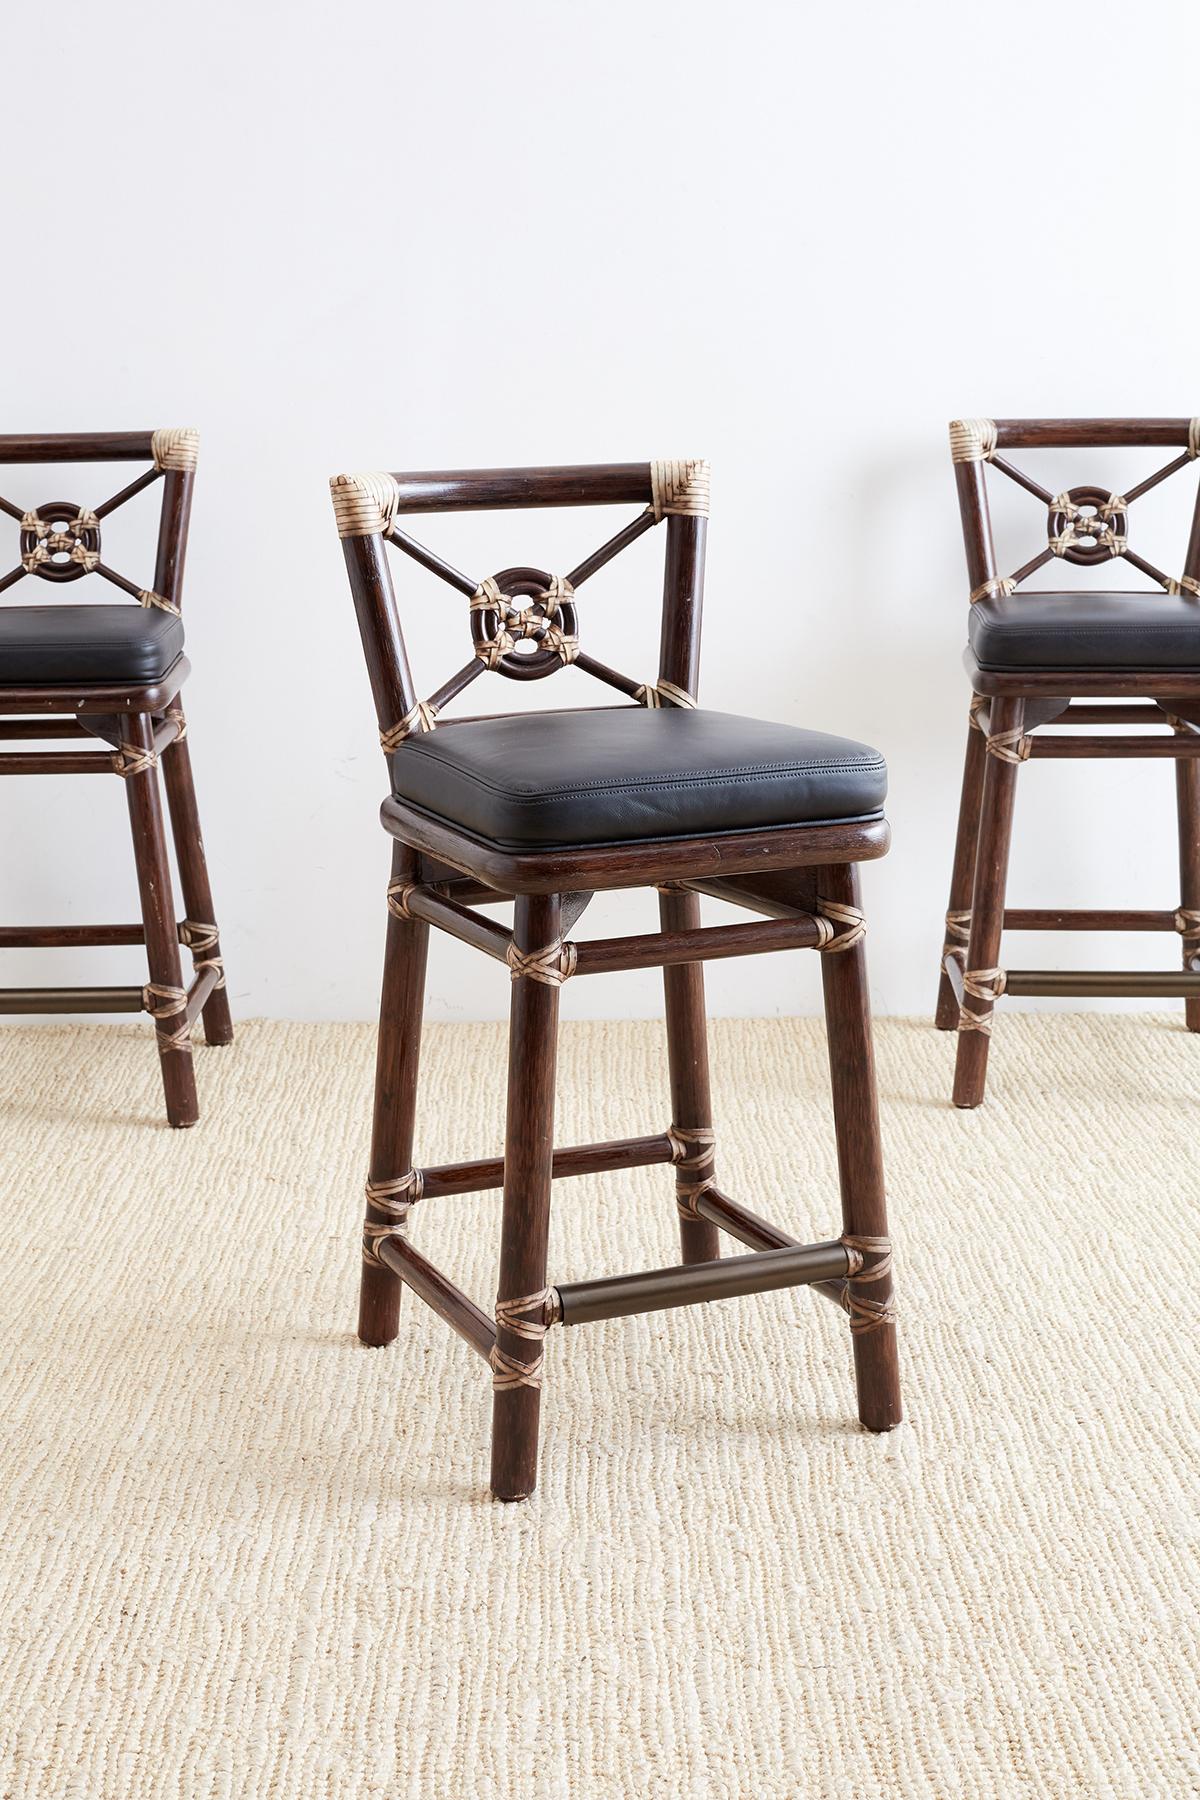 American McGuire Rattan and Leather Target Design Counter Barstools